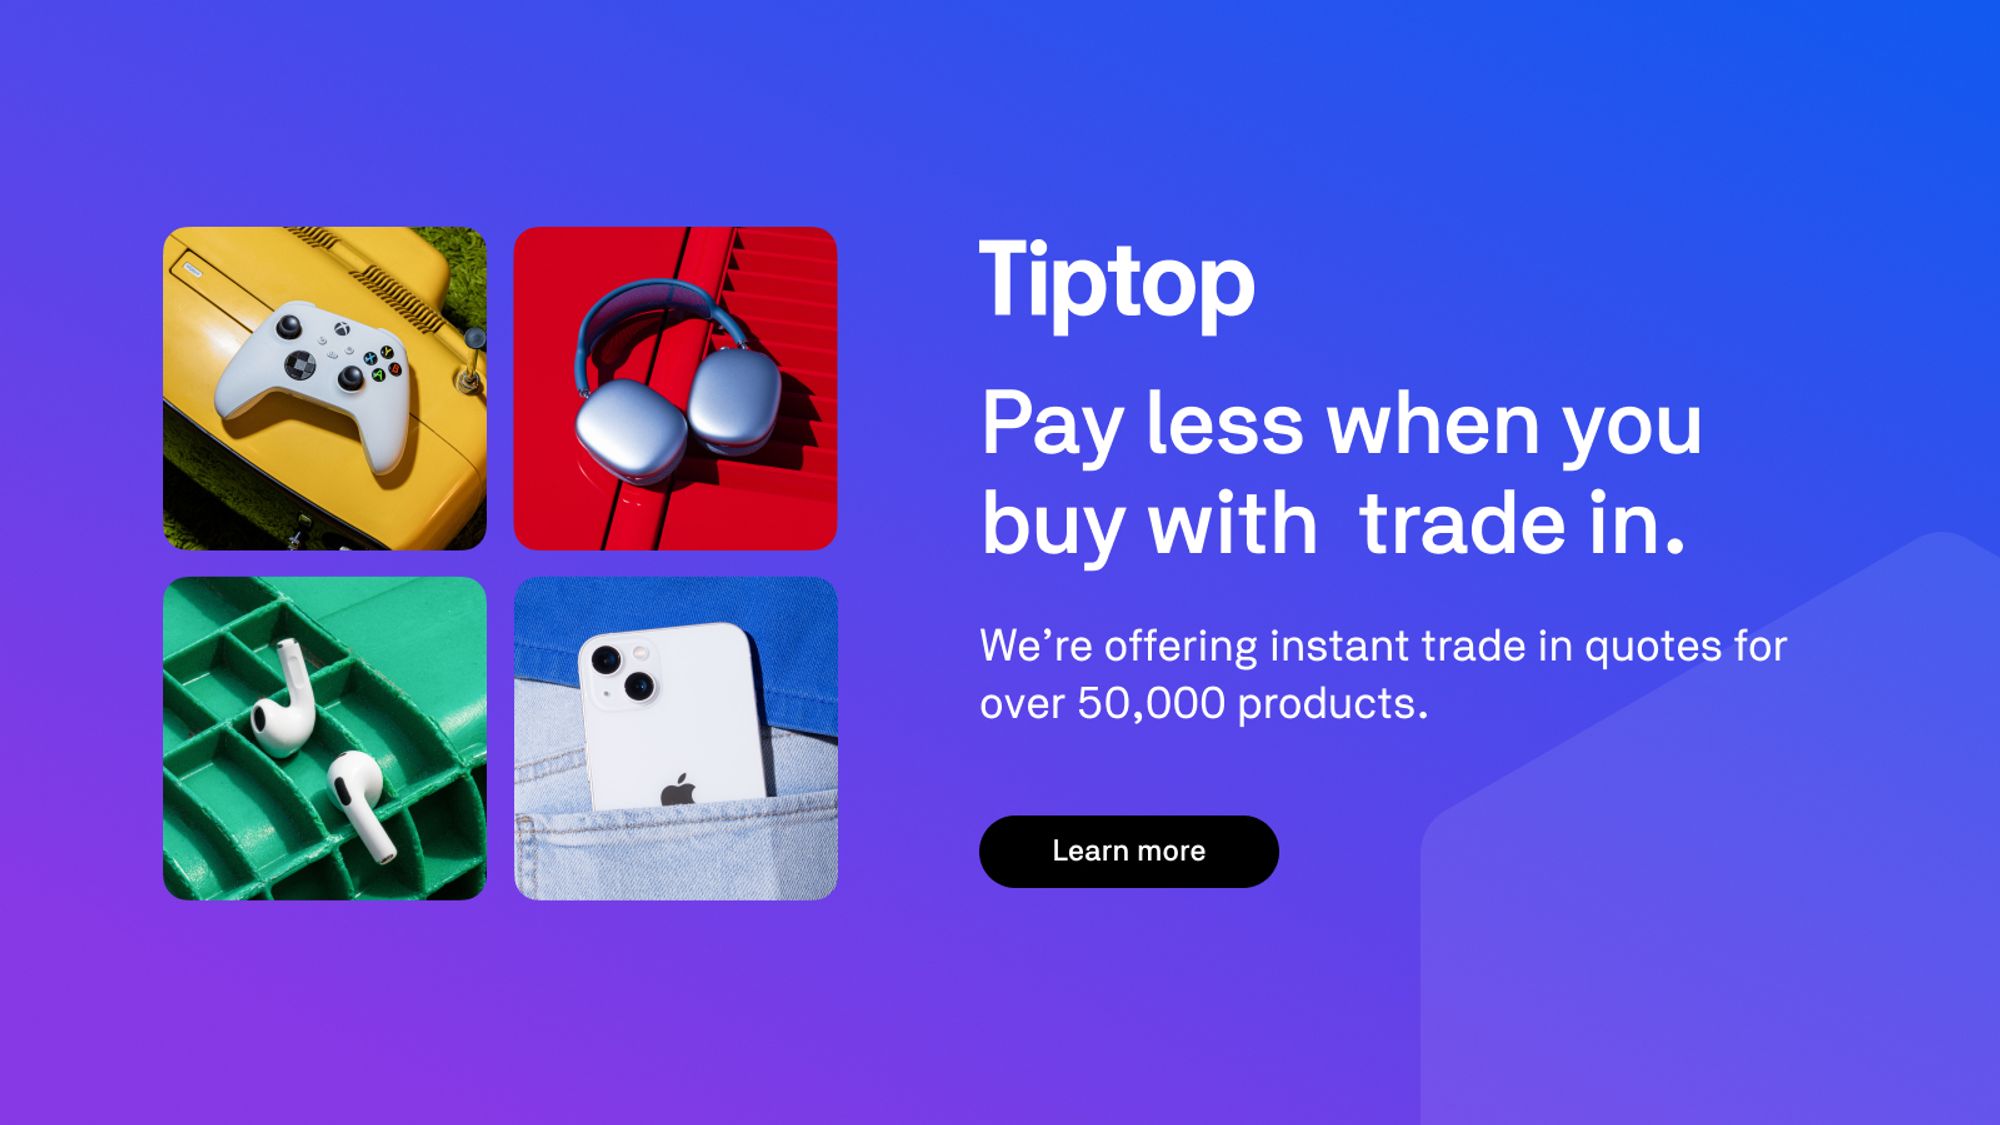 Tiptop launches to let you trade in to pay less